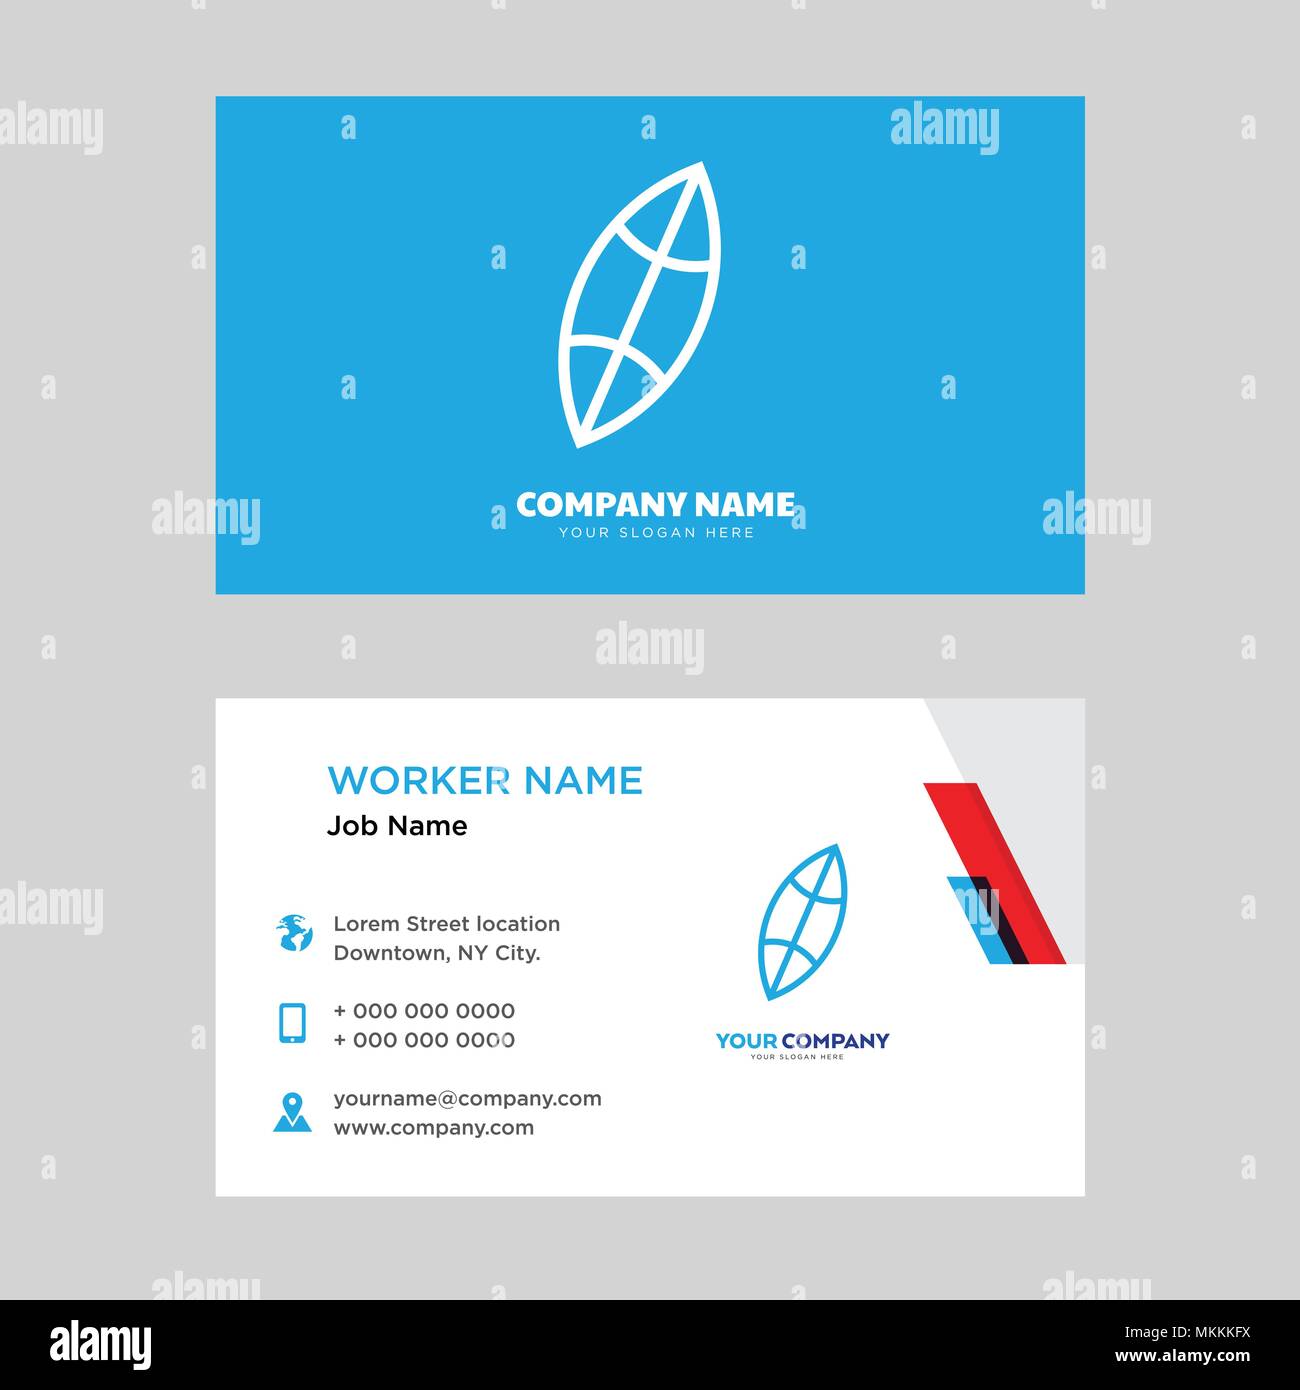 great fx business cards 8